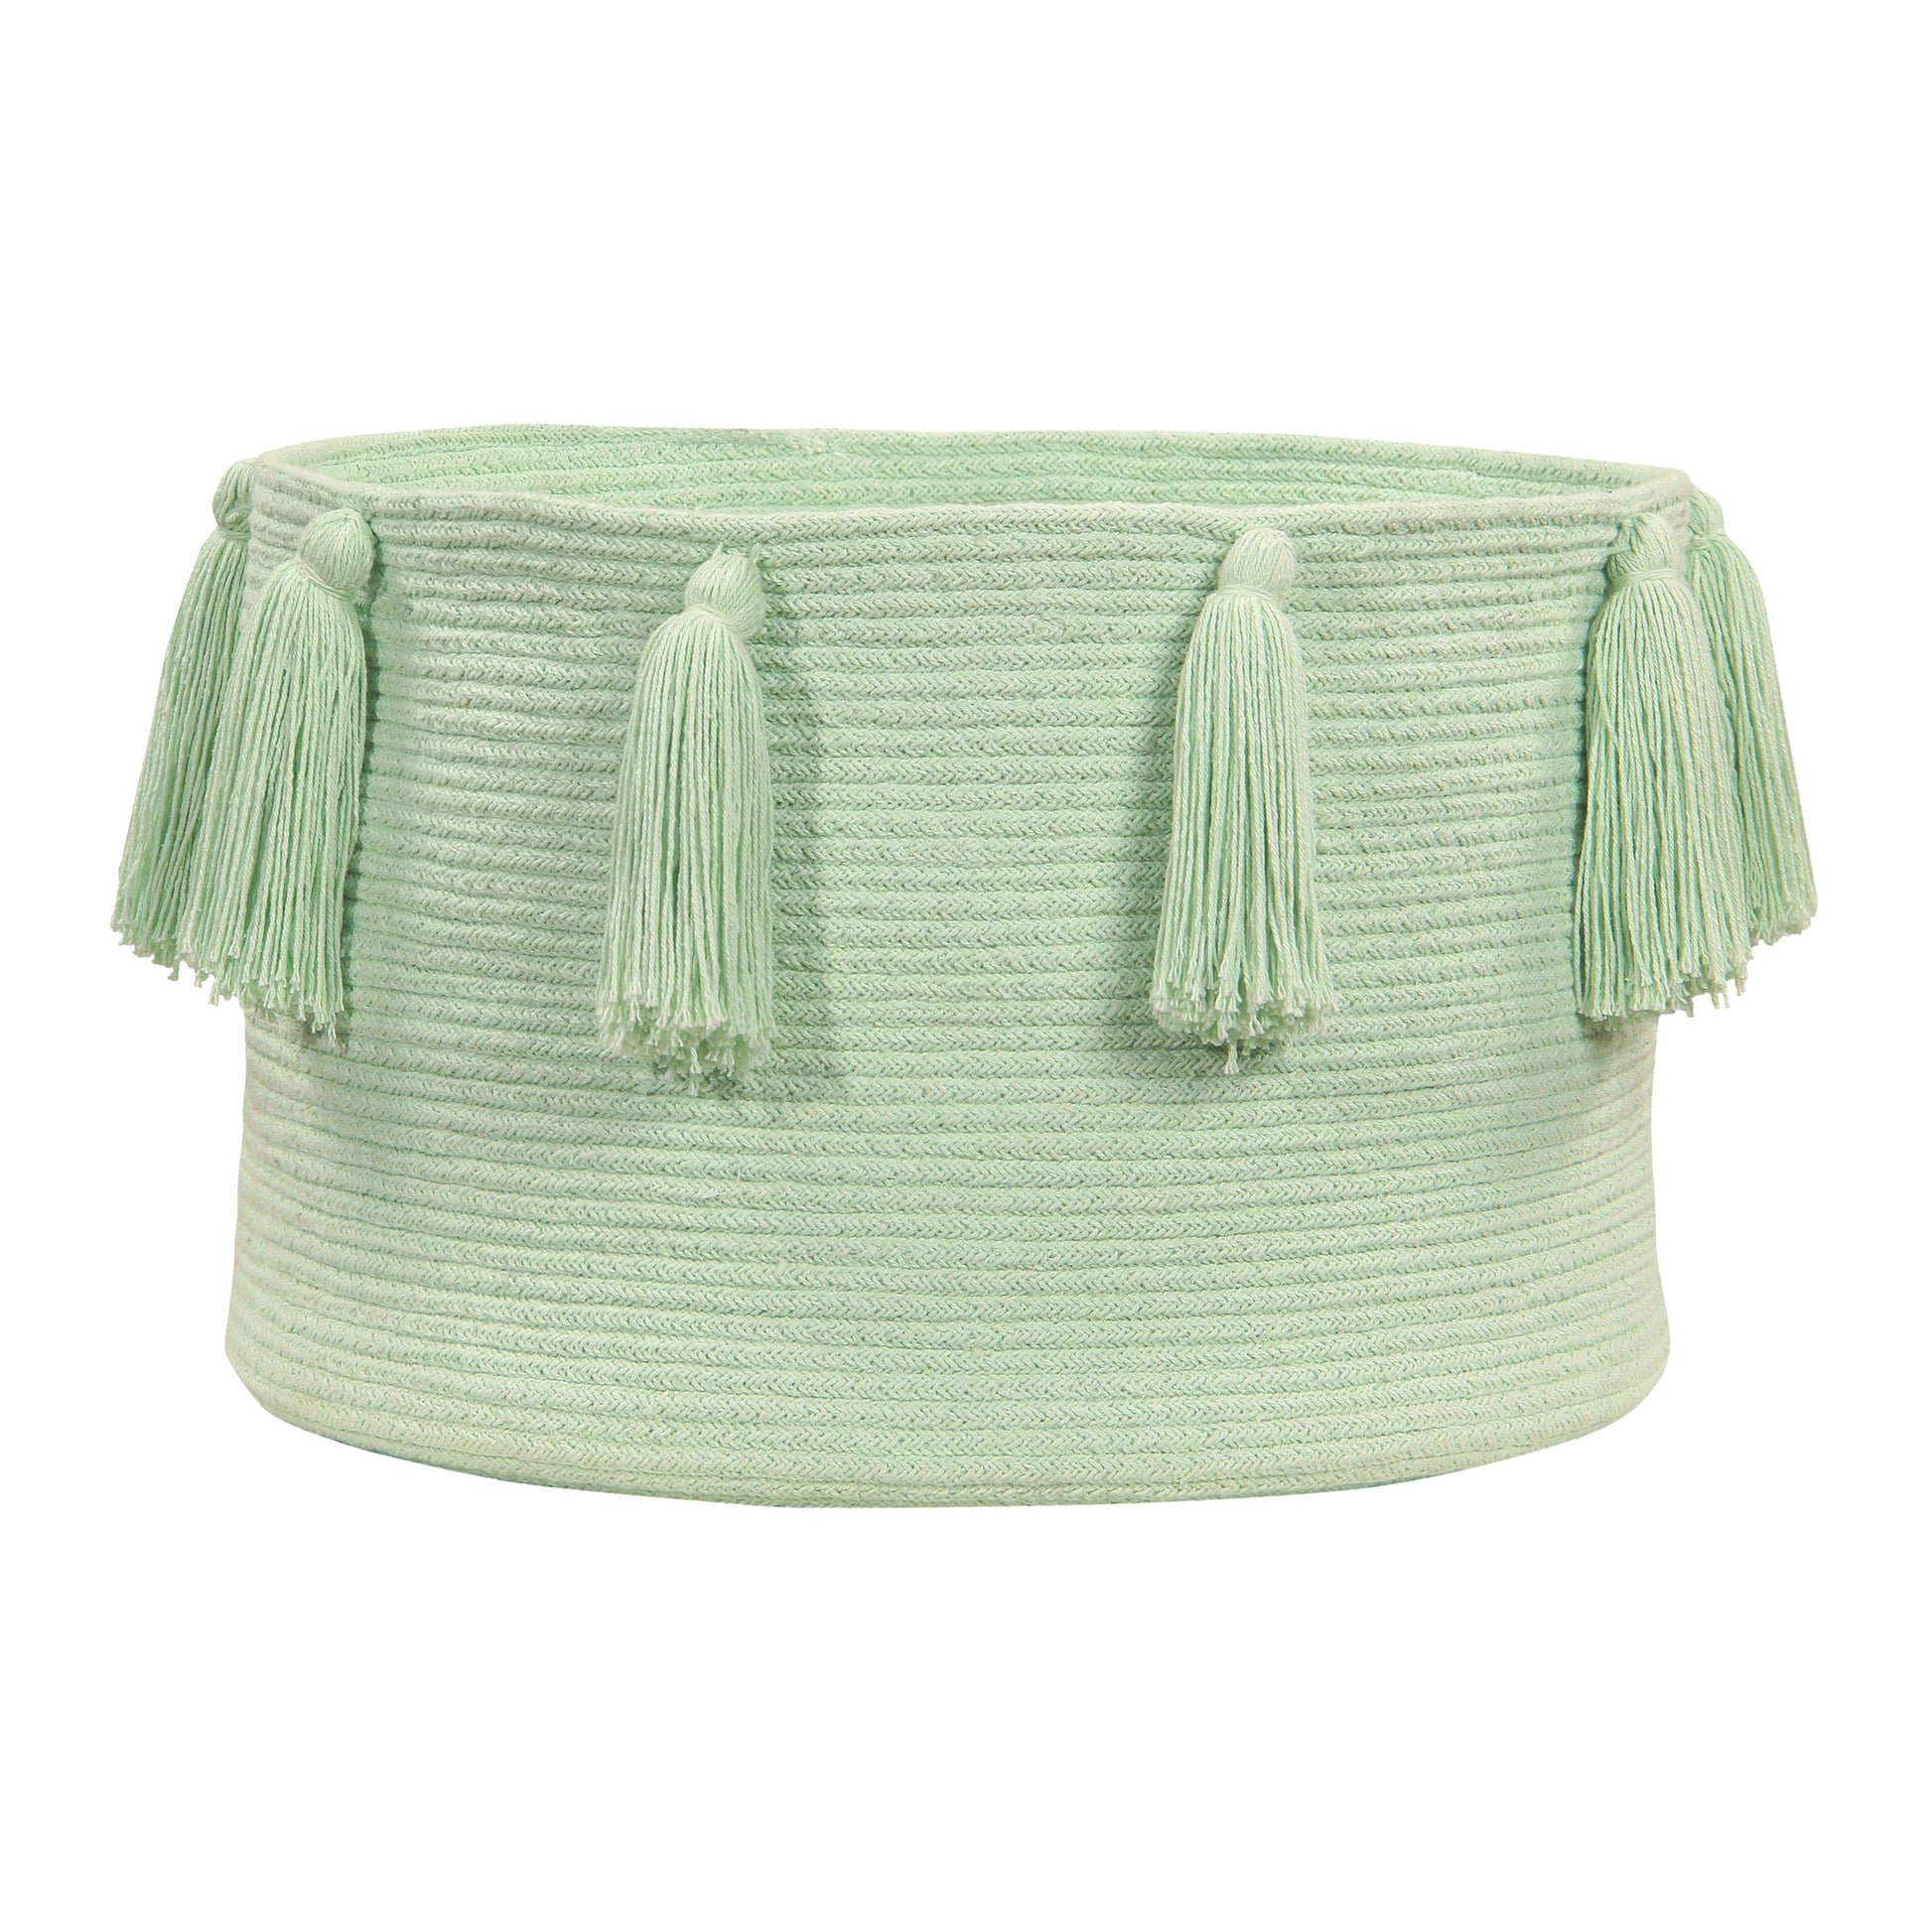 Lorena Canals Basket - Tassels (6 Colours Available)